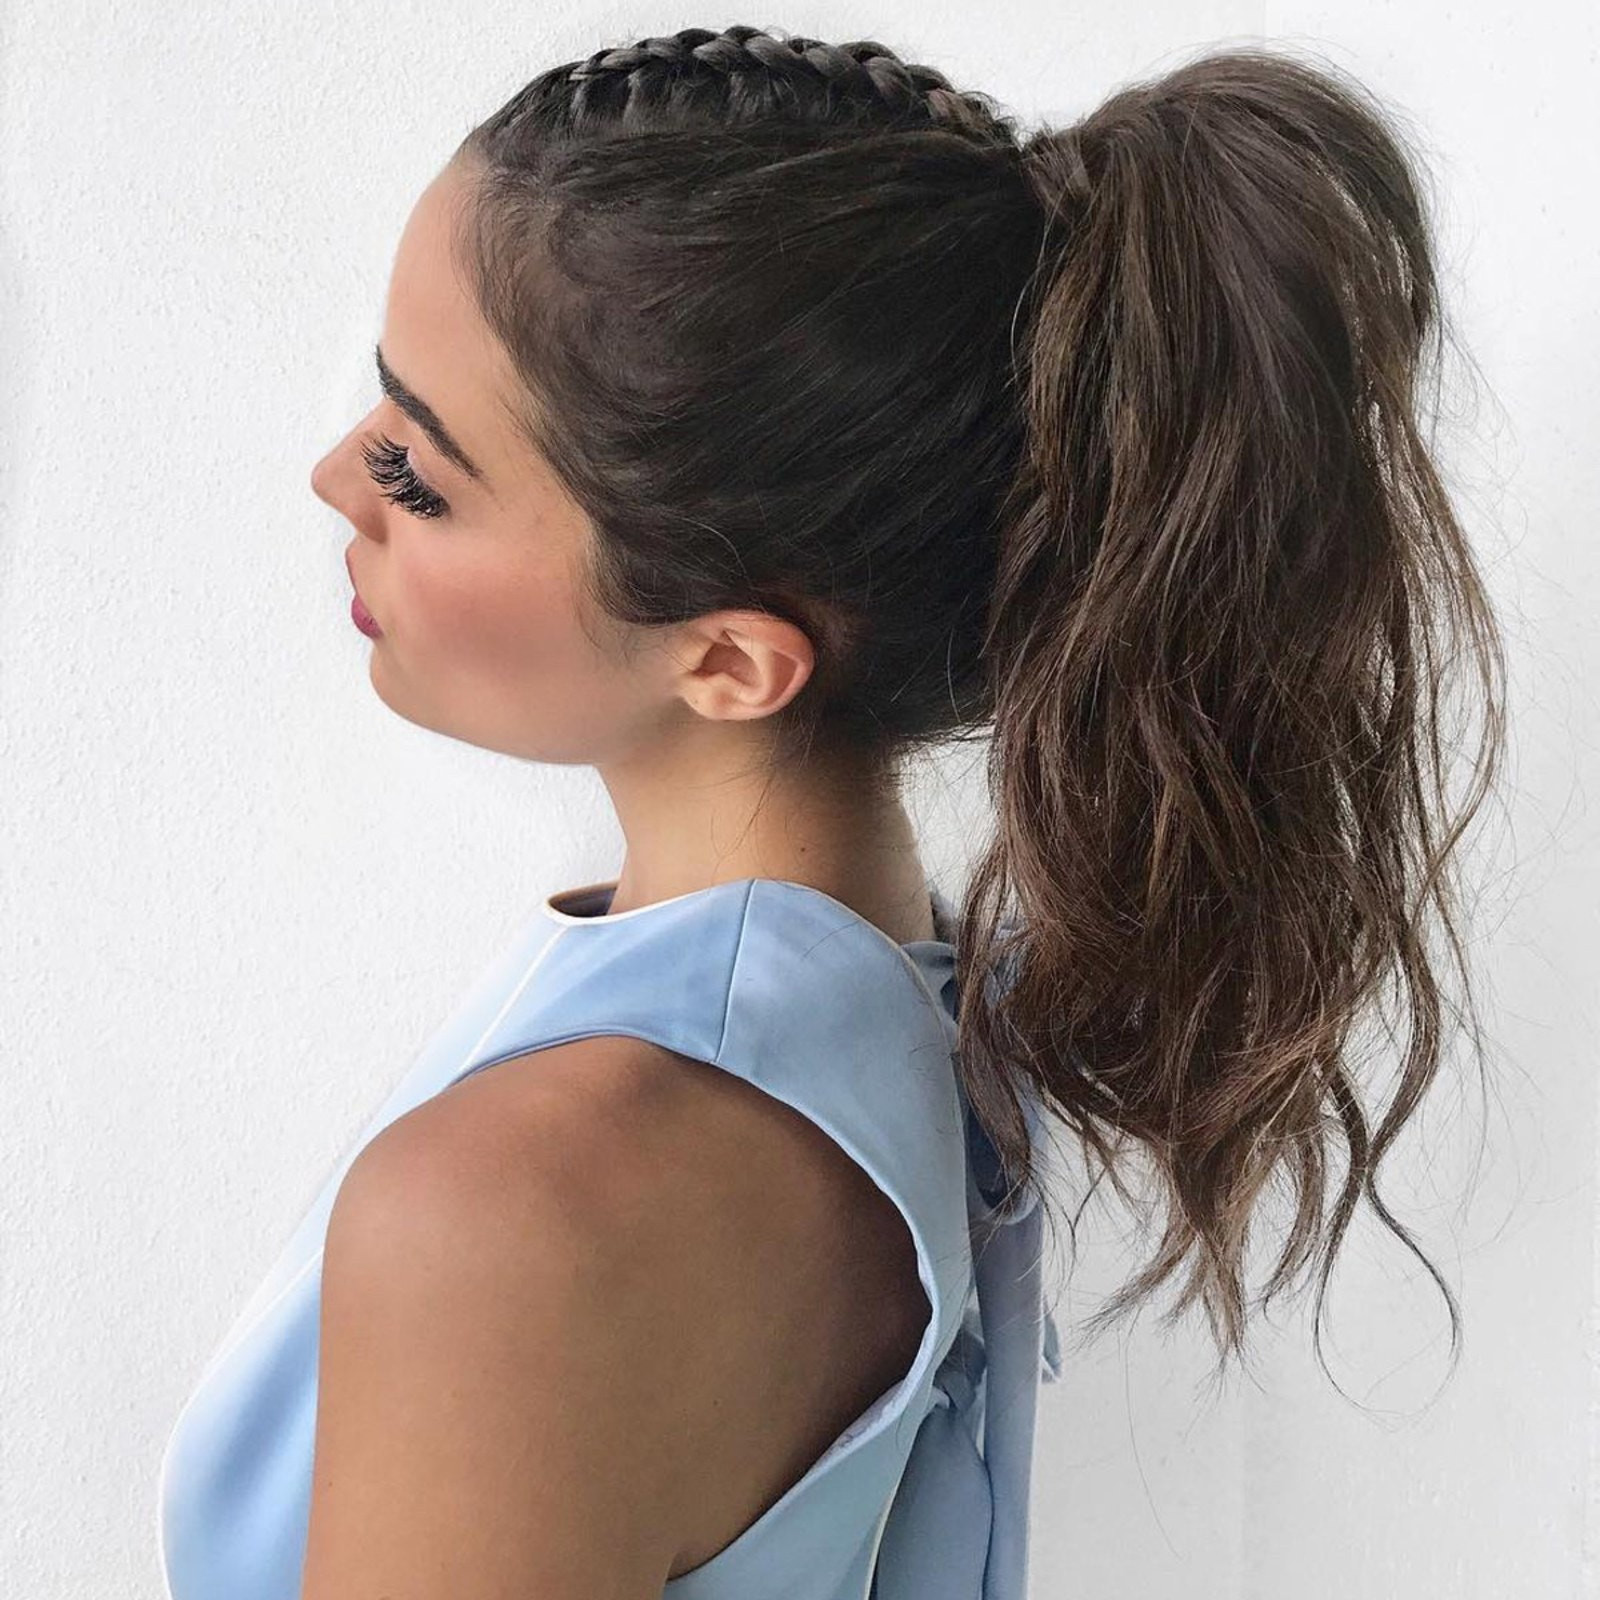 Ponytail Updo Hairstyles
 27 Ponytail Hairstyles for 2018 Best Ponytail Styles